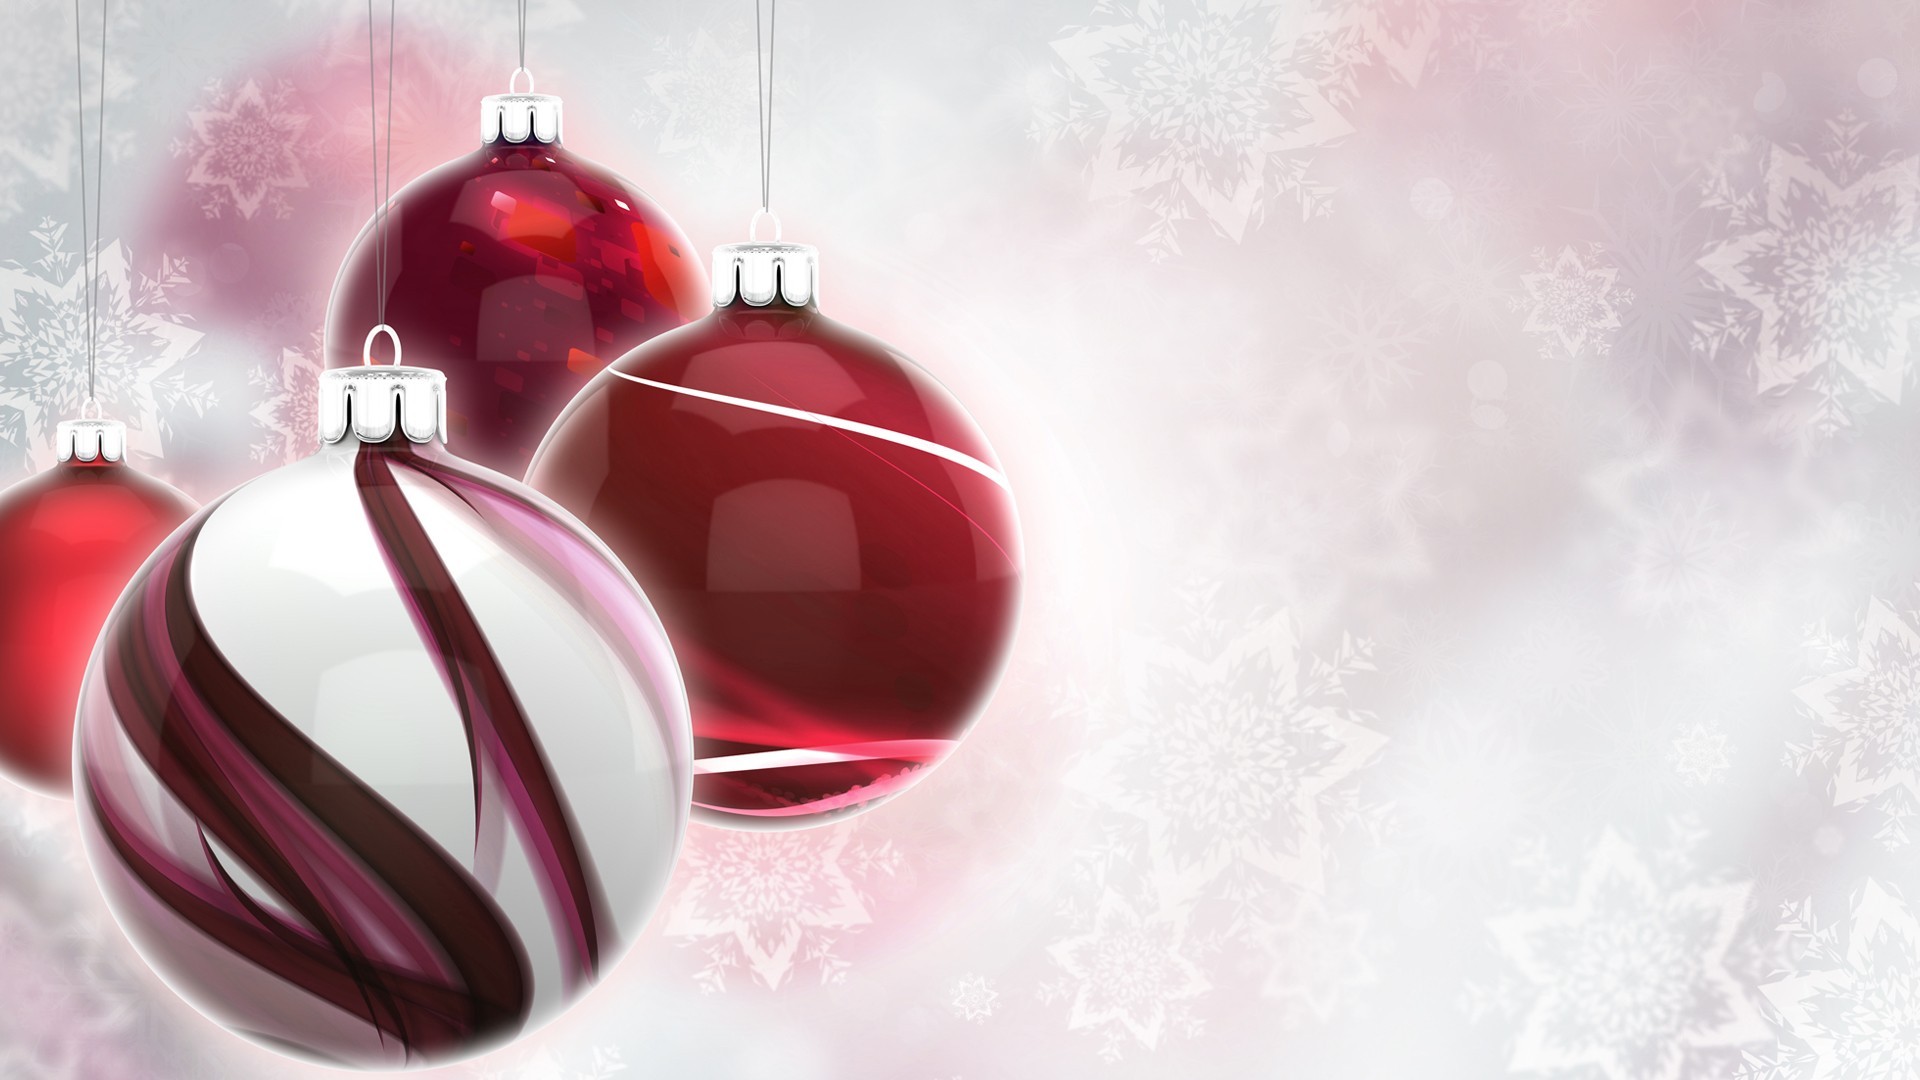 General 1920x1080 Christmas ornaments  Christmas red white